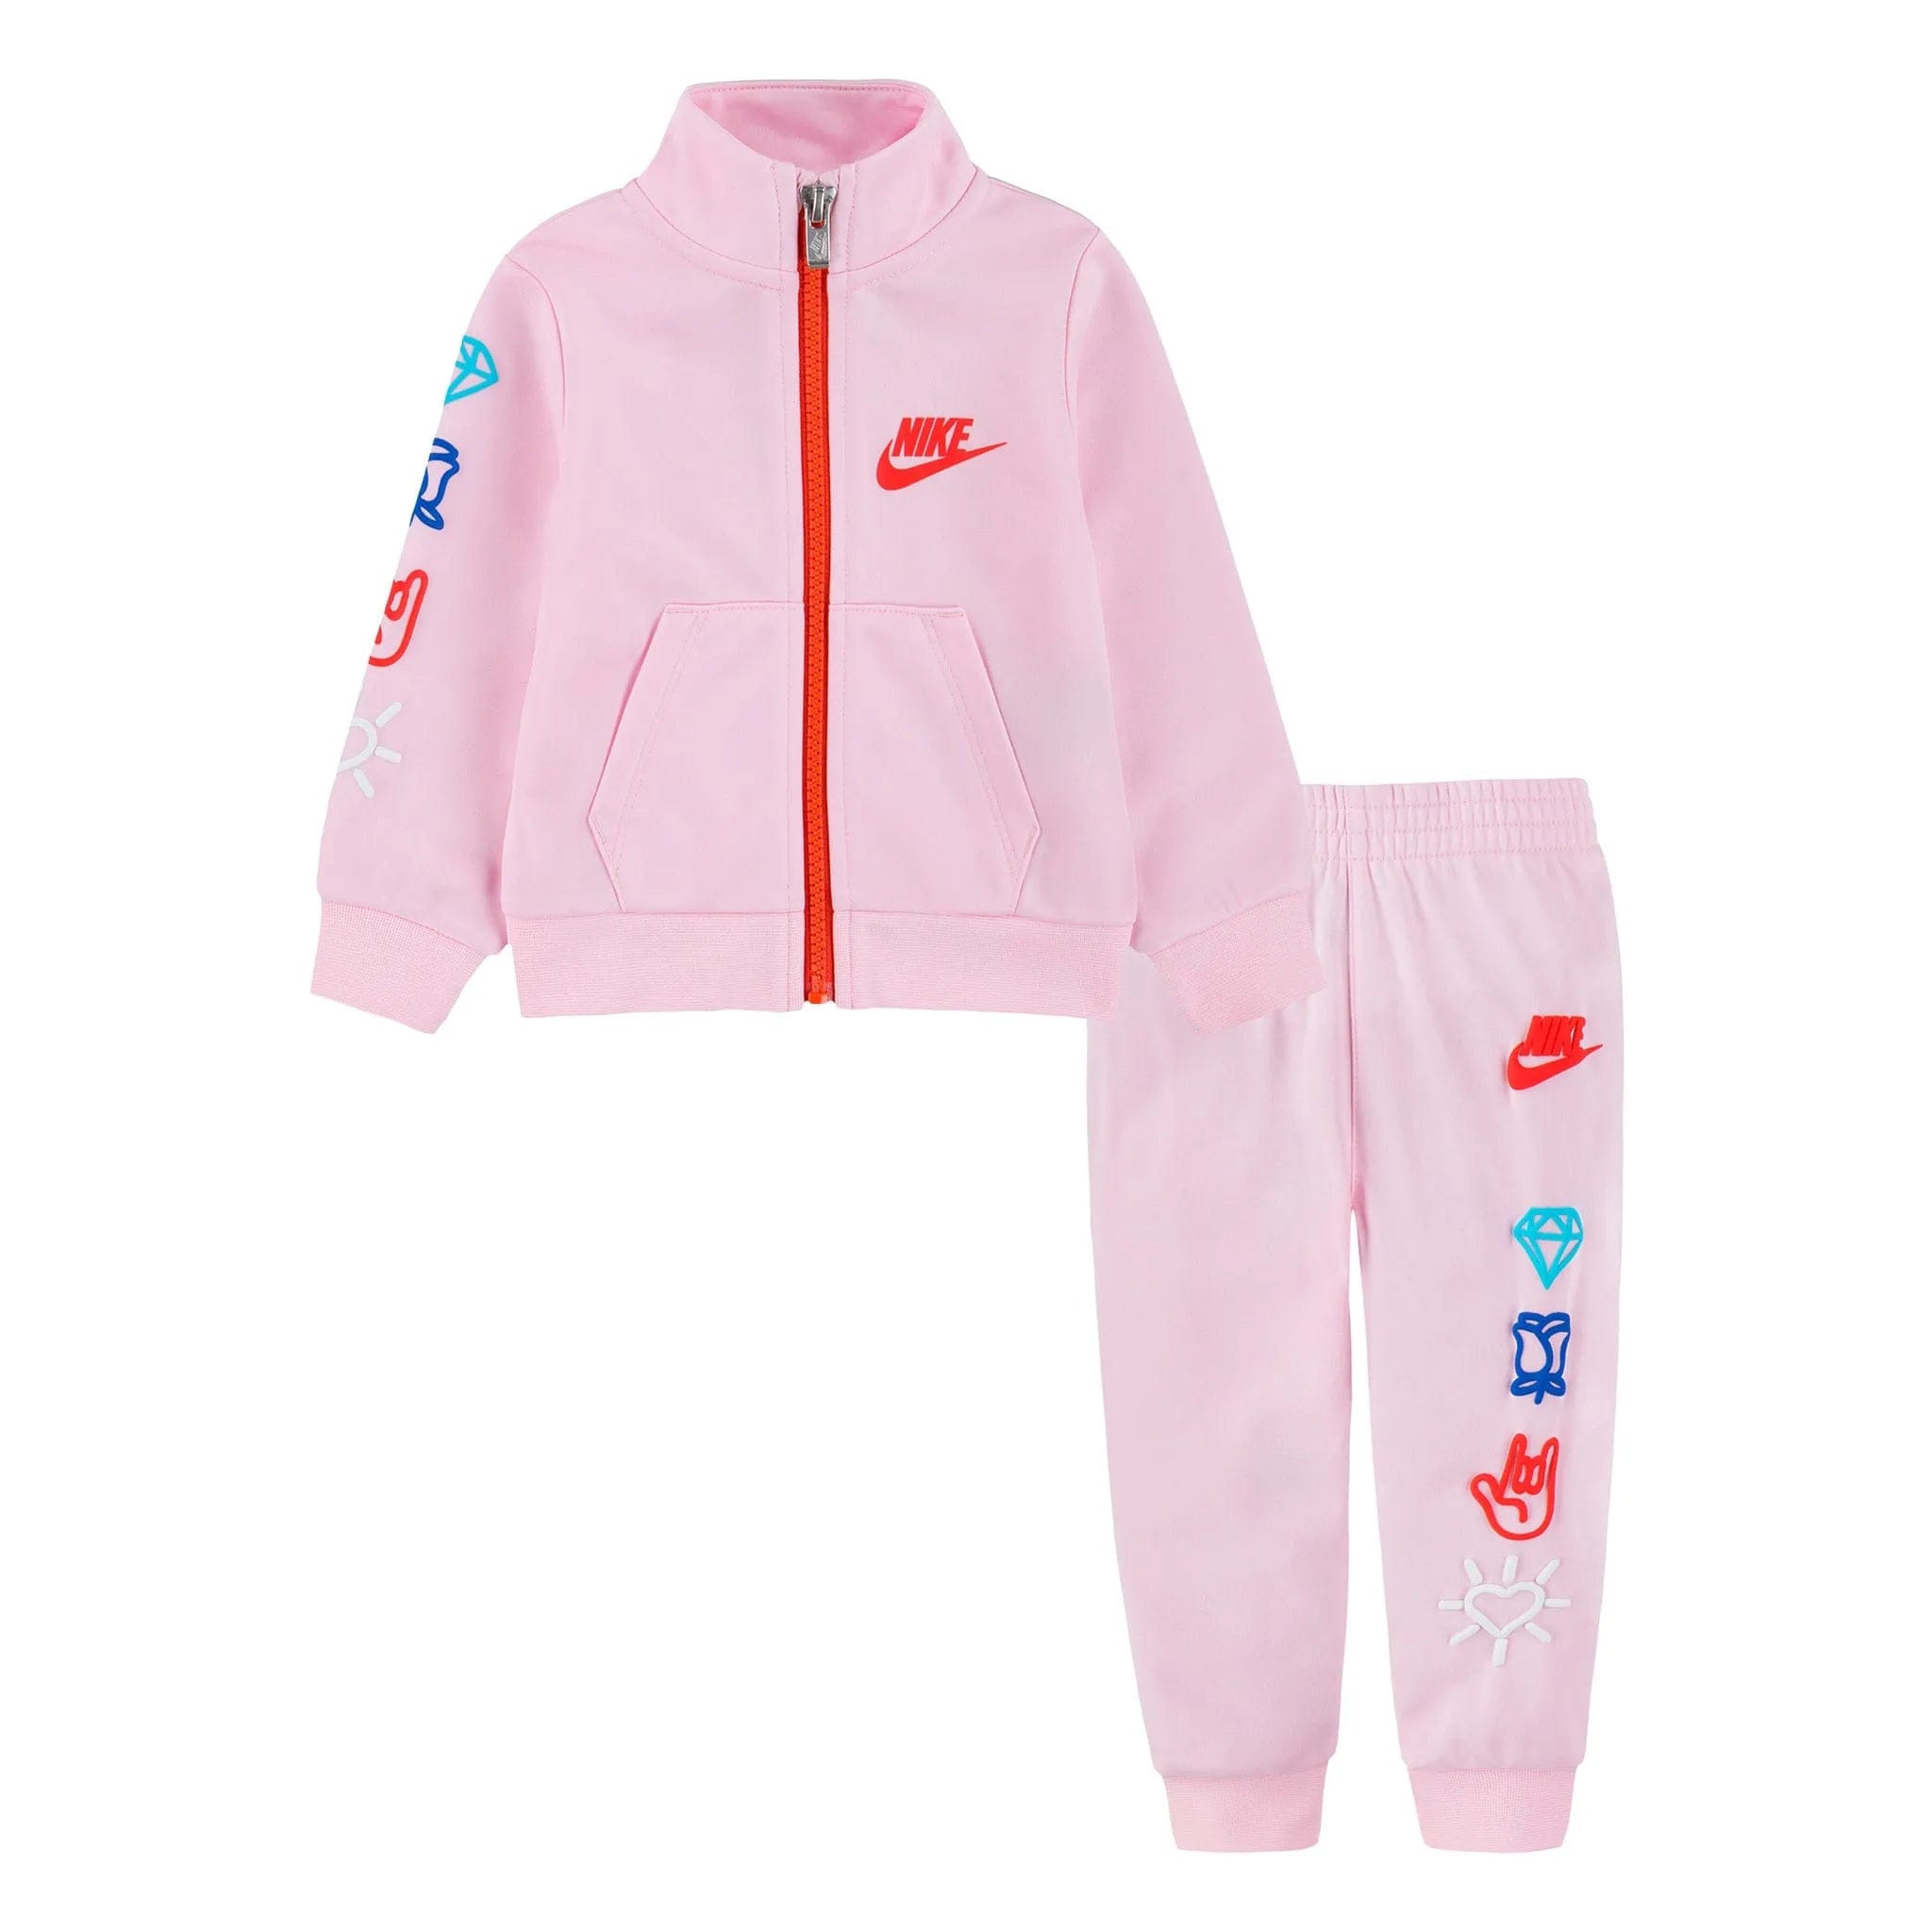 Nike NIKE INFANT'S DAY TRICOT PINK 2 SET TRACKSUIT - INSPORT